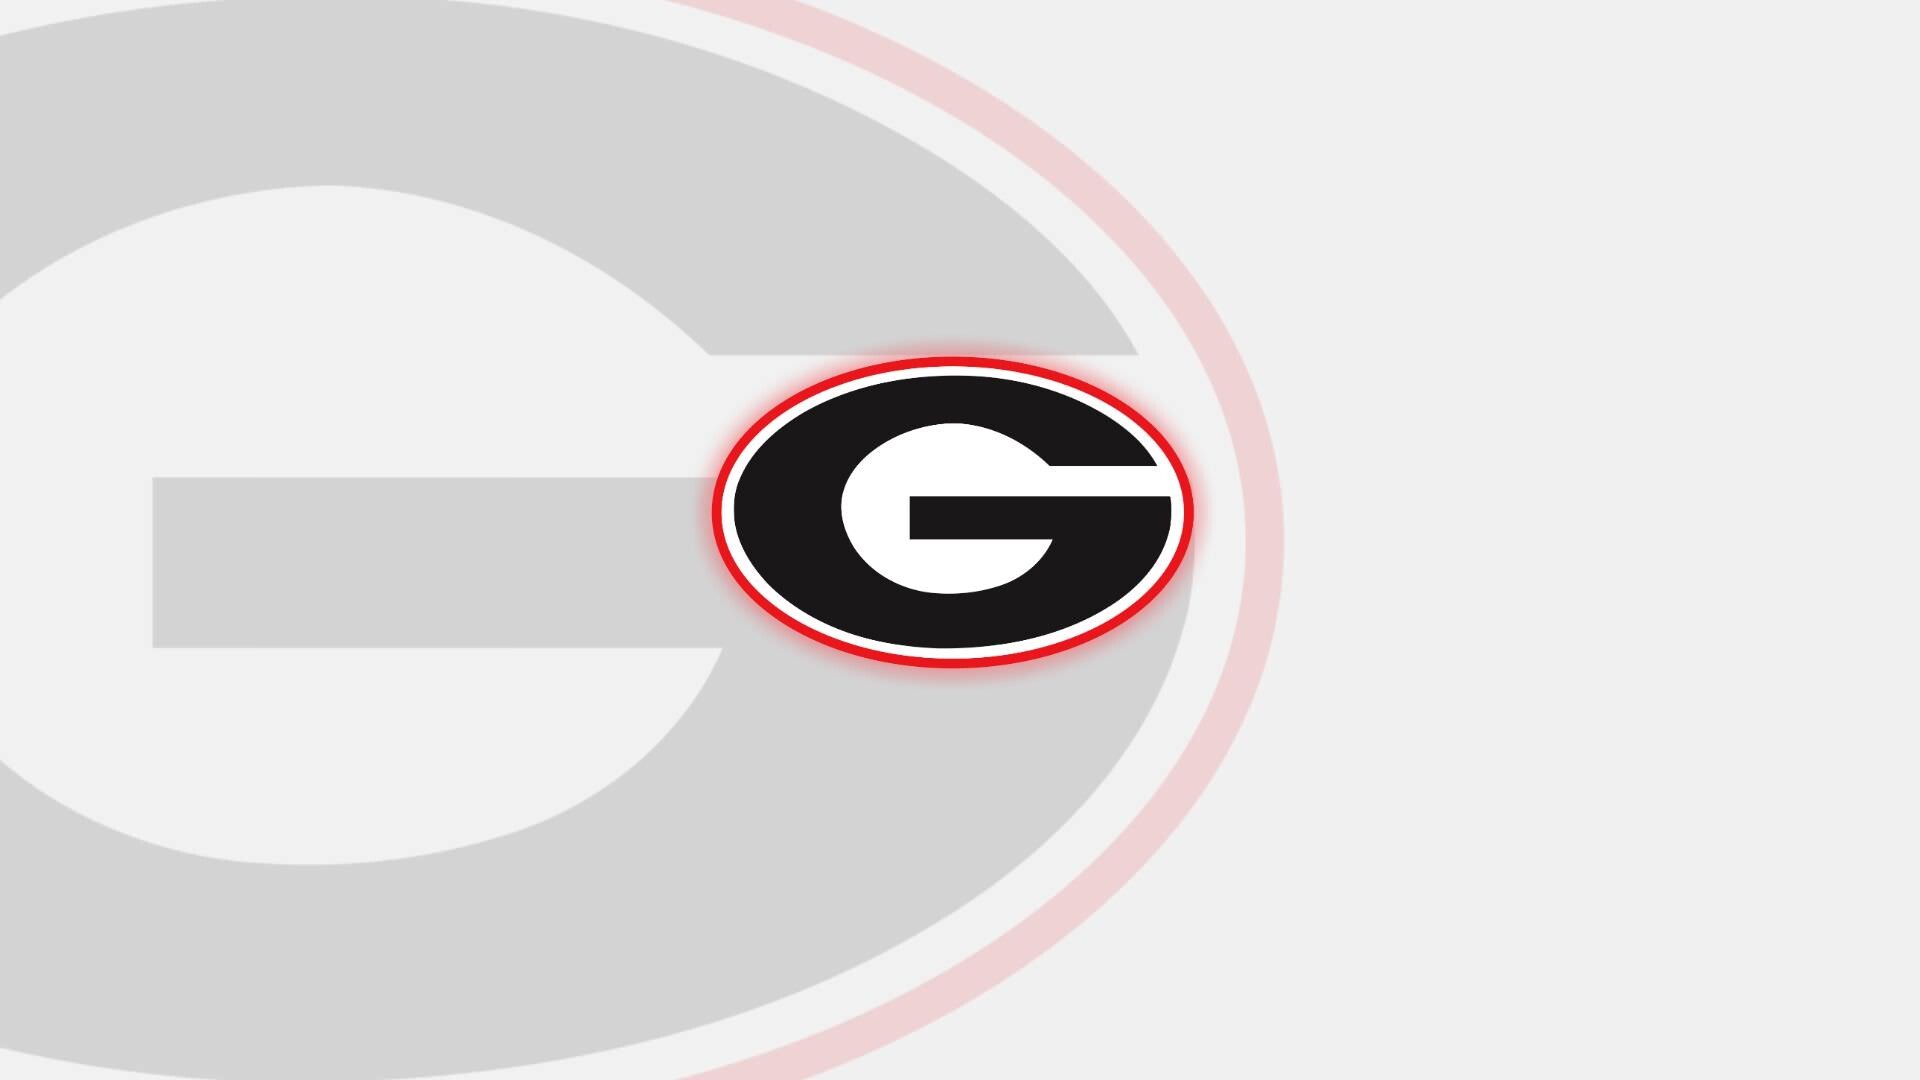 Georgia Bulldogs: The program that has won 15 conference championships including 13 SEC championships. 1920x1080 Full HD Wallpaper.